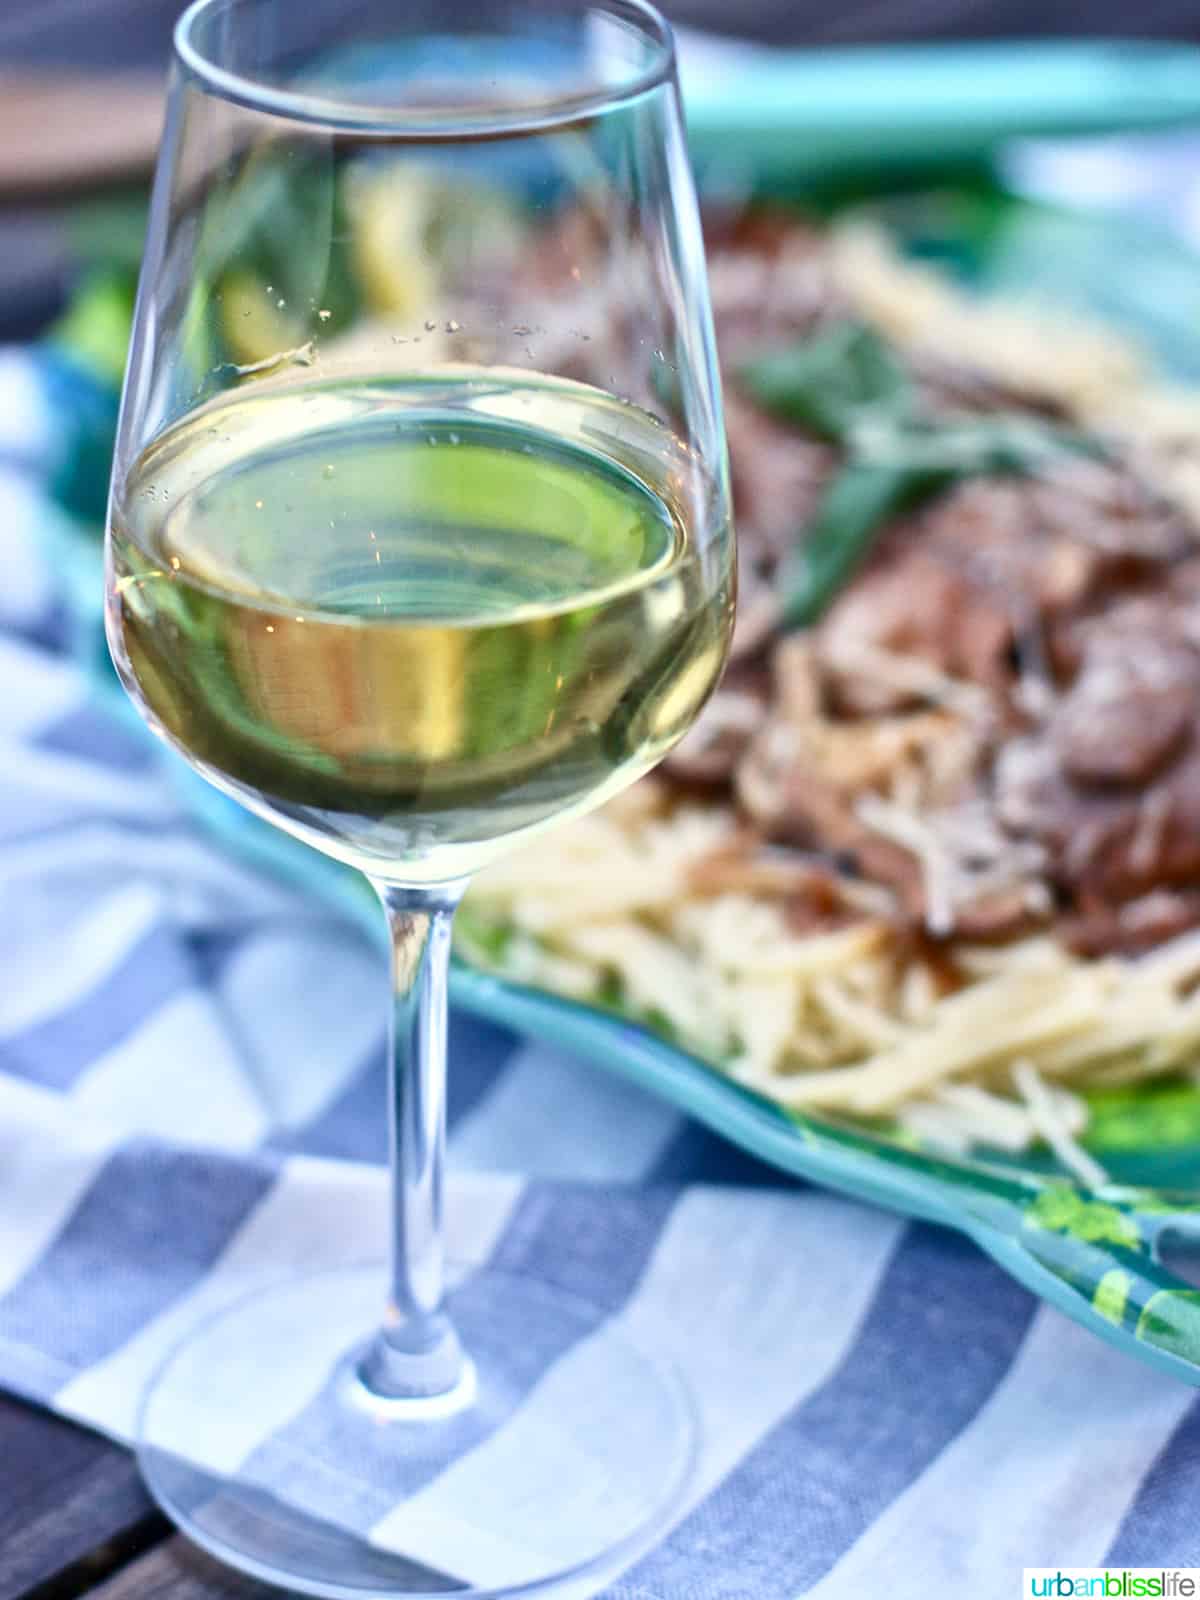 glass of white wine with pasta and meat dish behind.